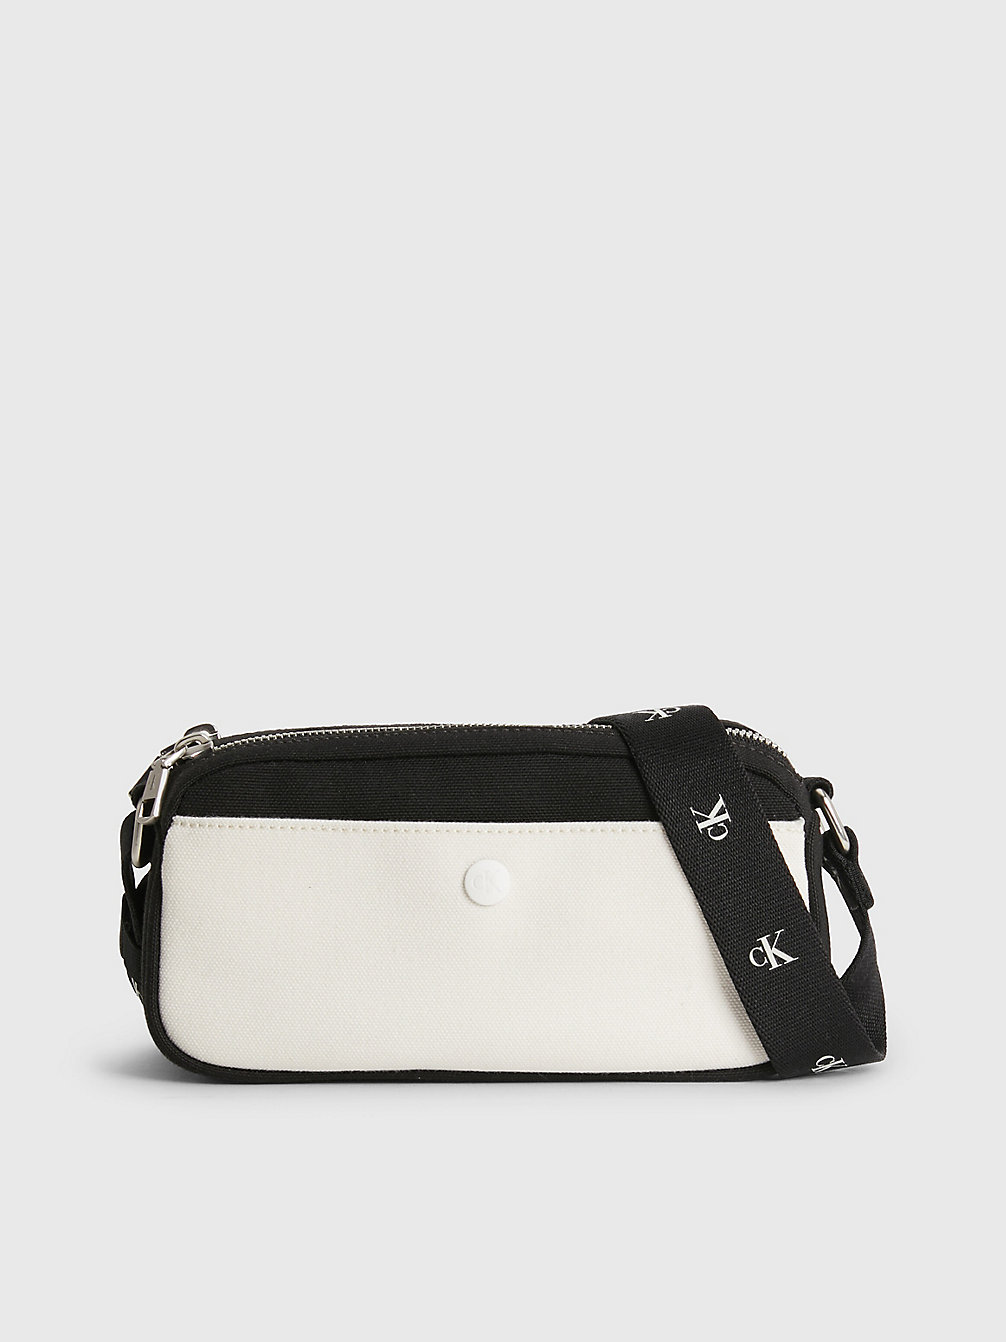 BLACK / ANCIENT WHITE Recycled Canvas Crossbody Bag undefined women Calvin Klein